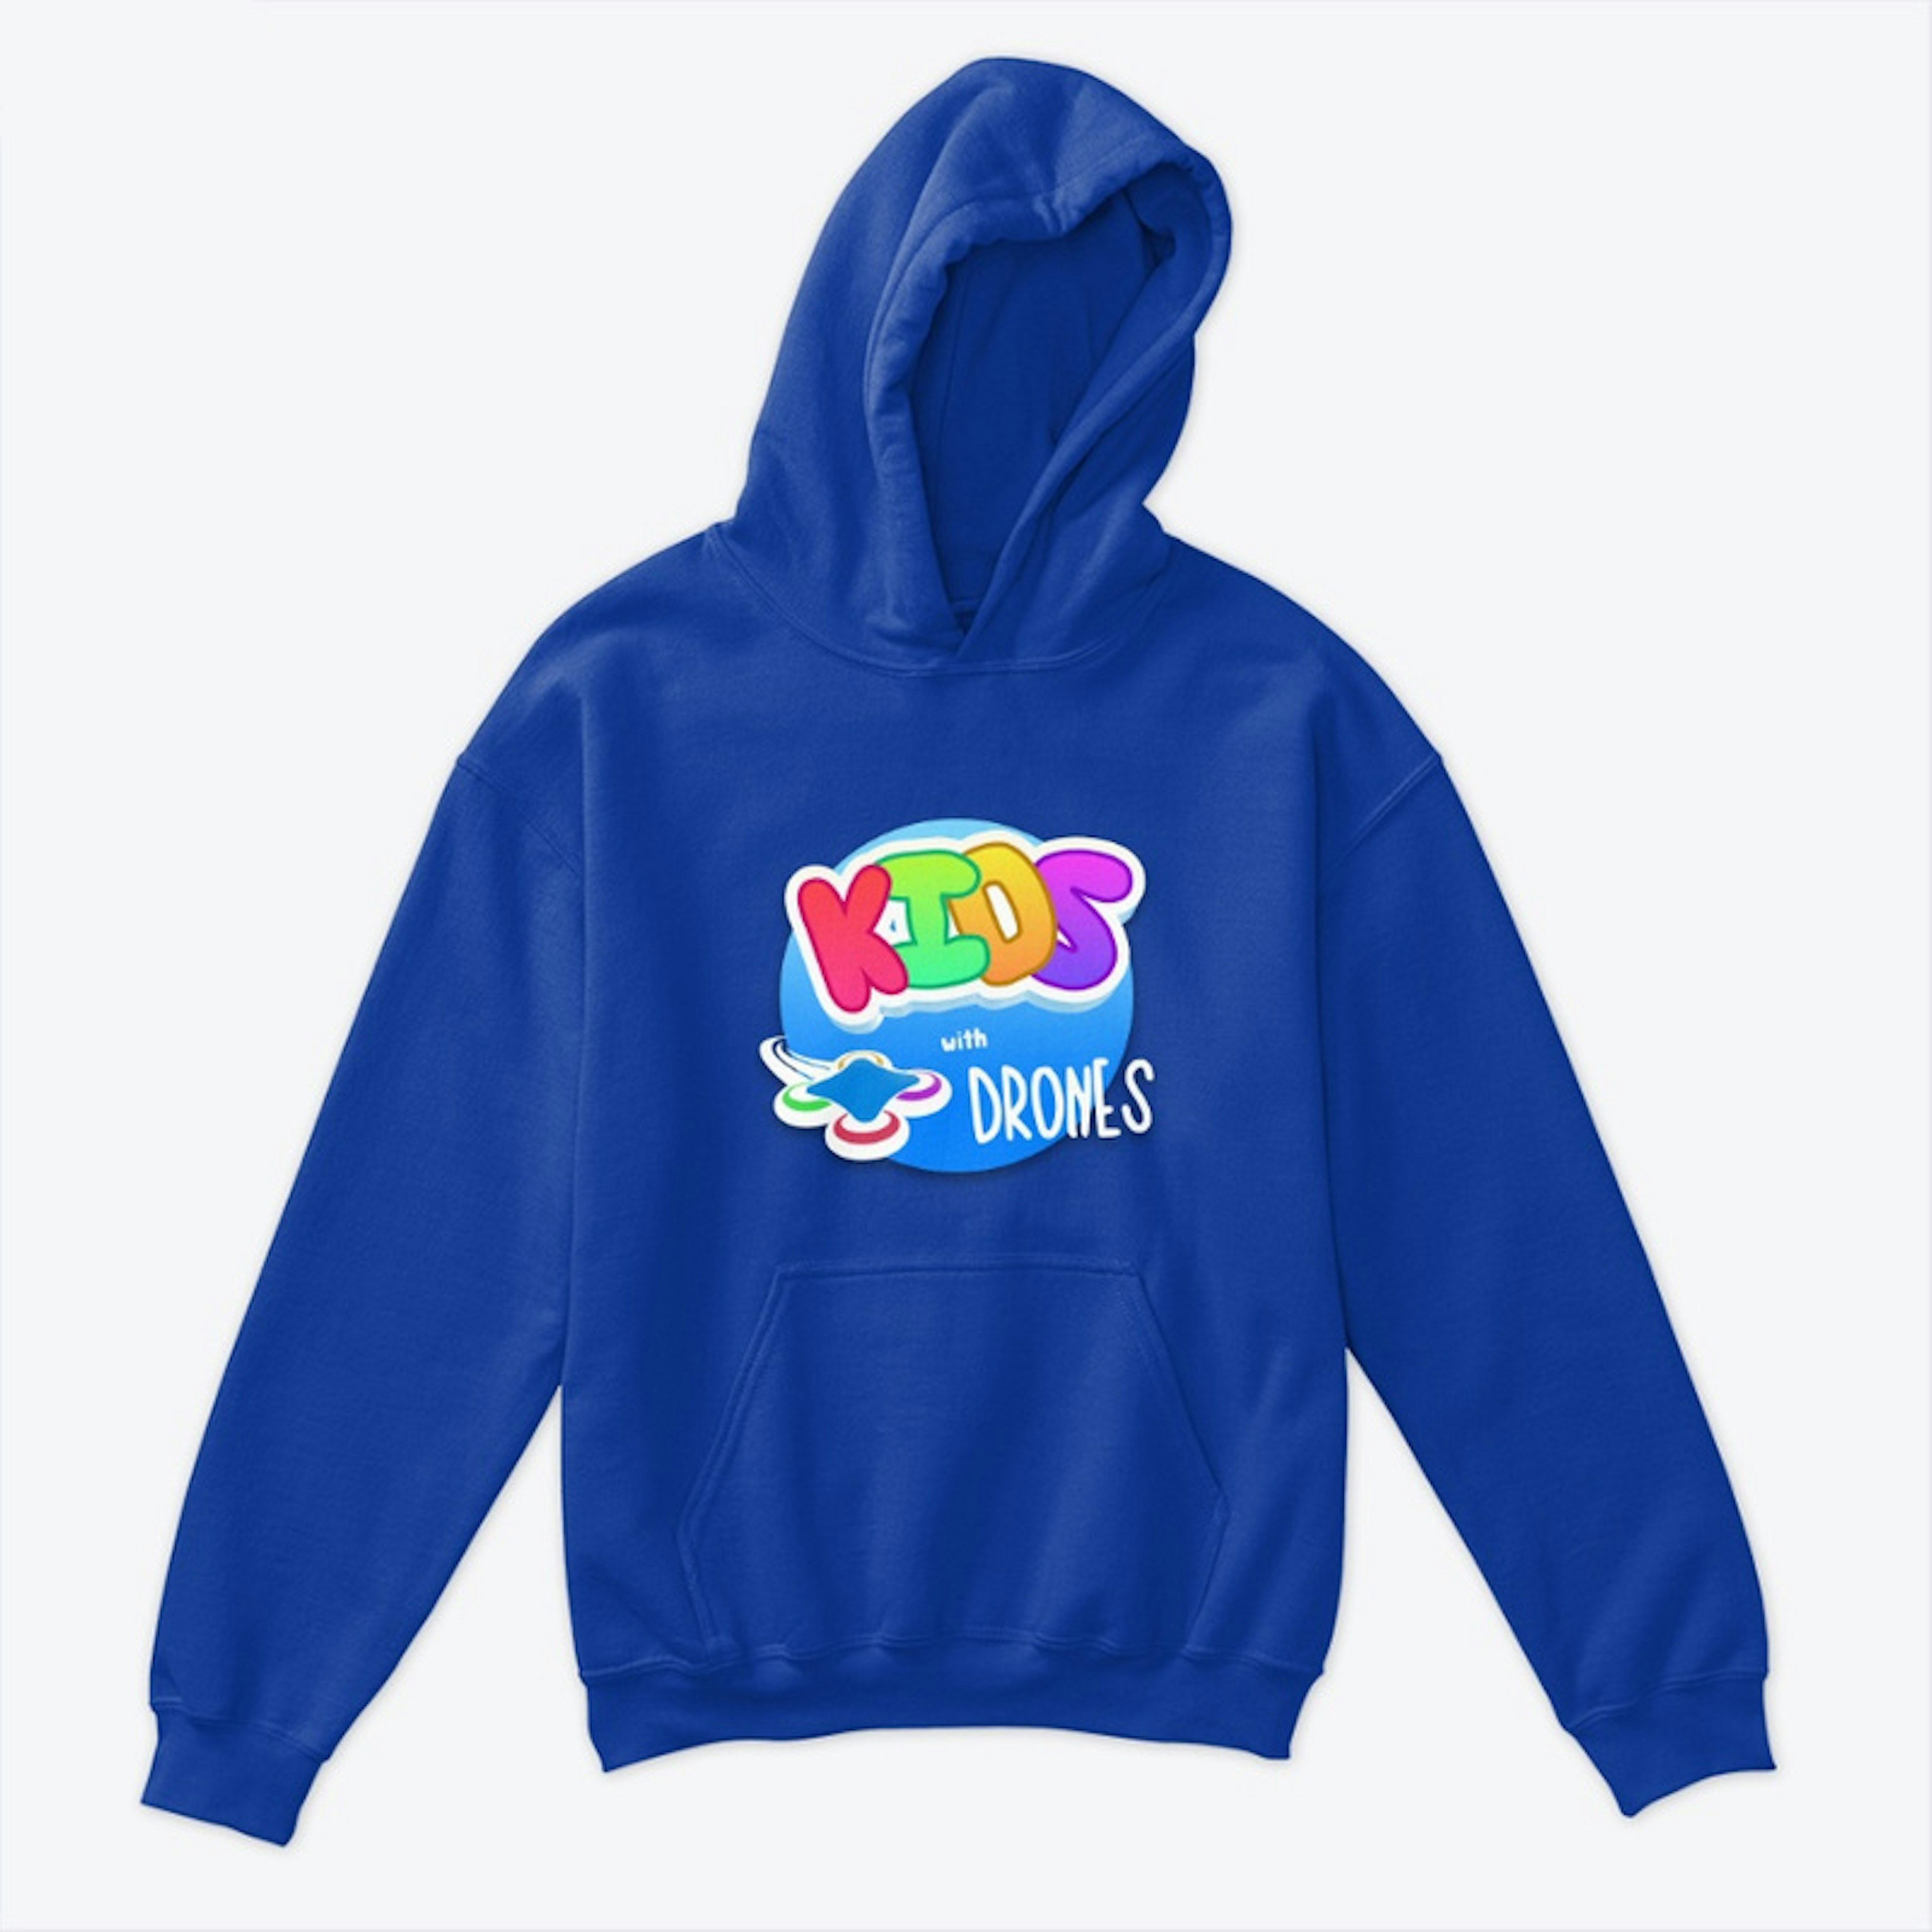 Kids with Drones Hoodie